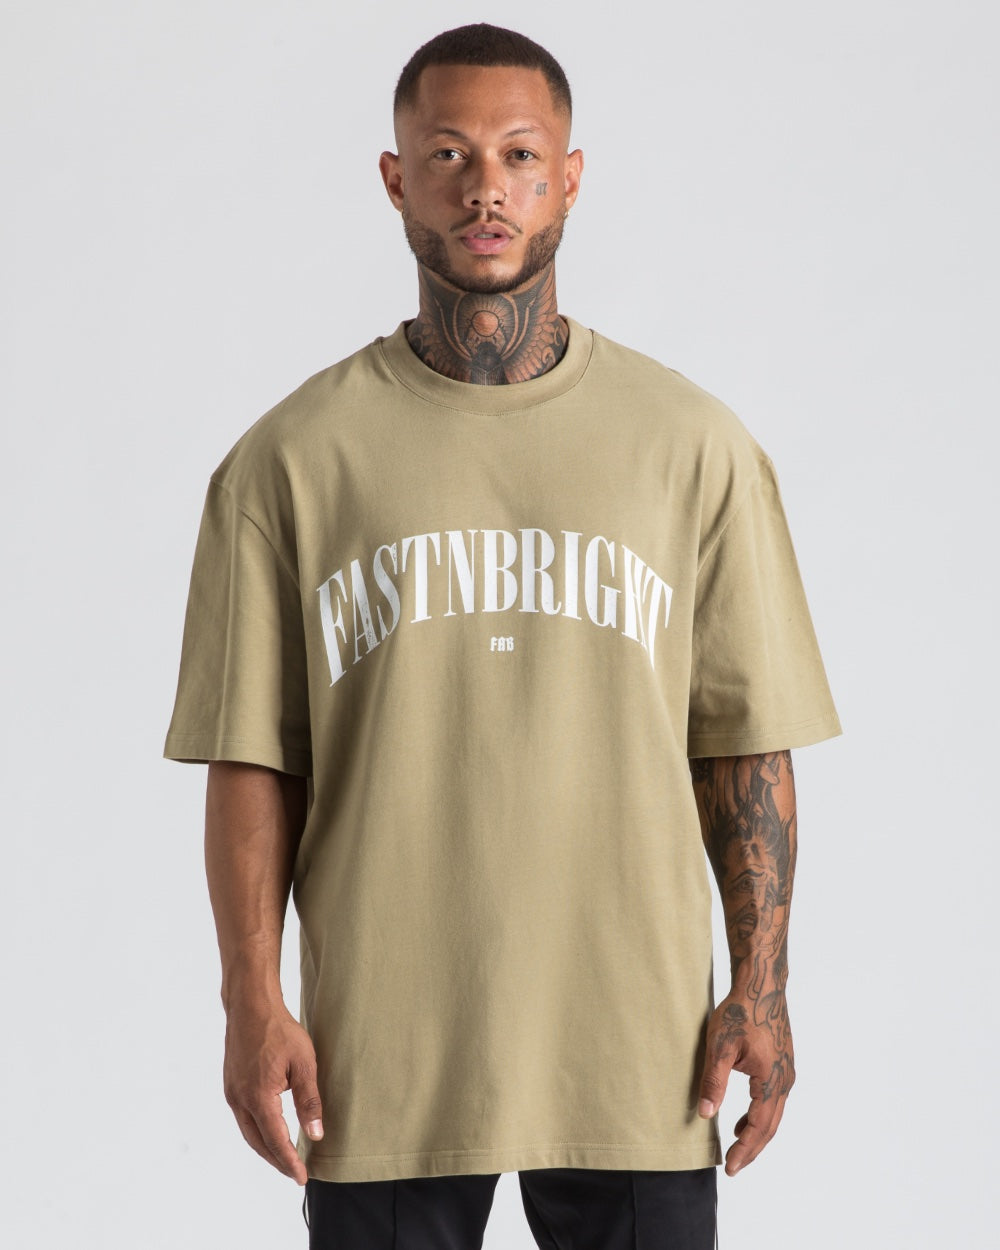 FASTNBRIGHT Tee